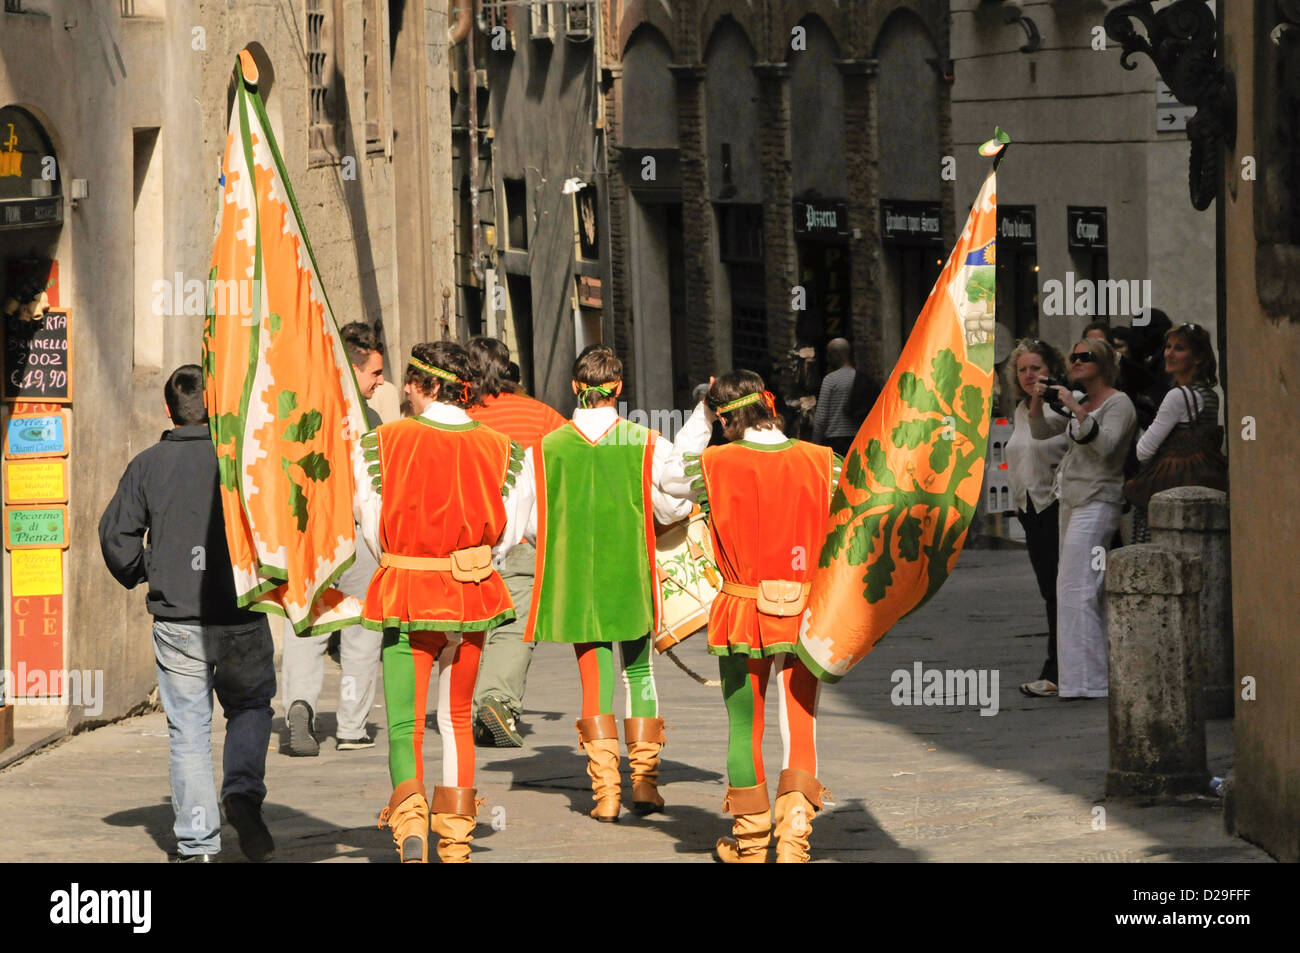 Medieval Costumes And Flags On Festival Day In Siena, Italy Stock Photo